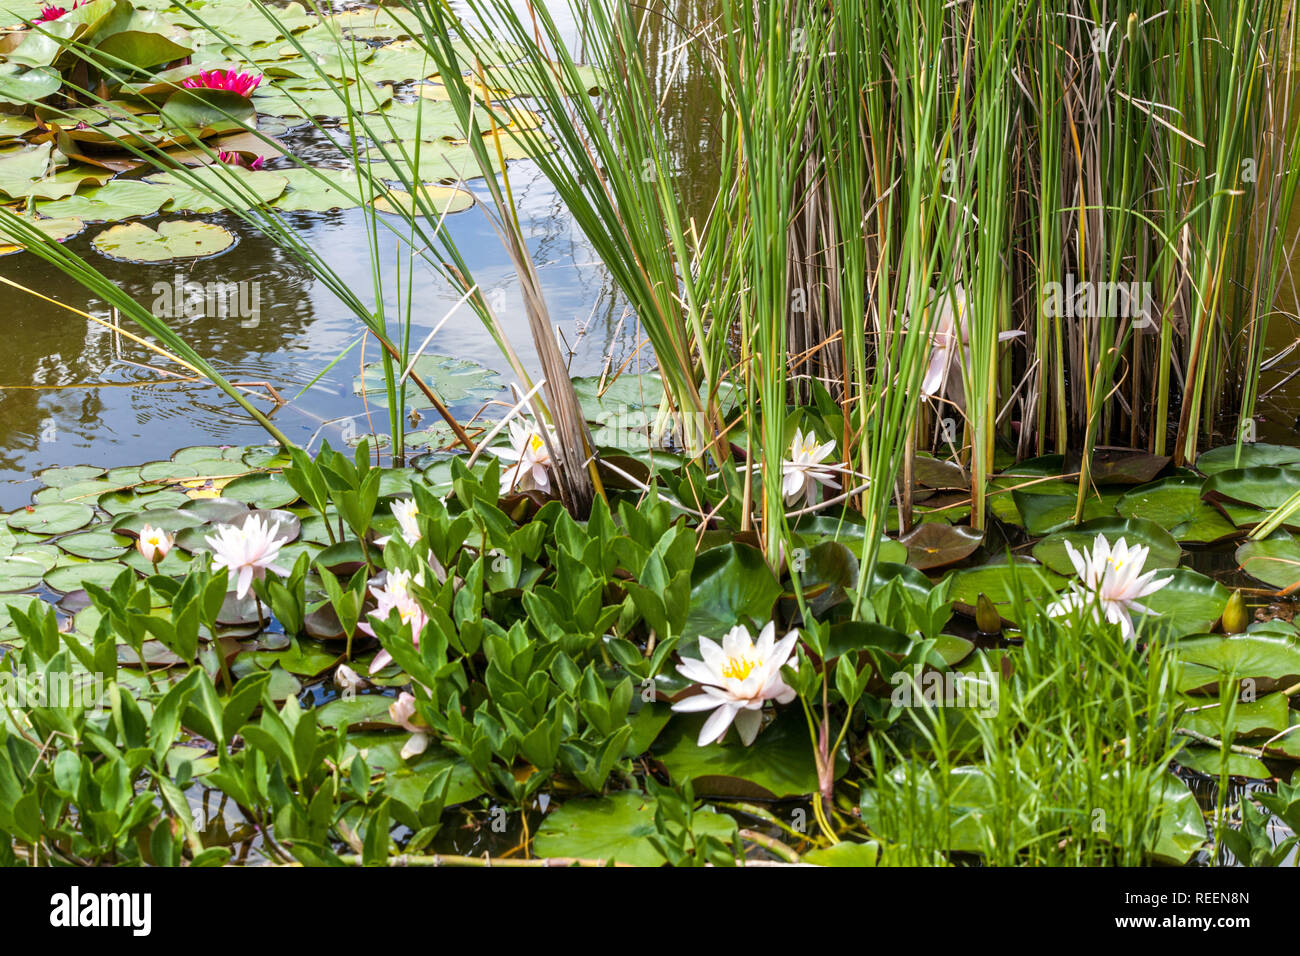 Garden pond plants with water plants Stock Photo